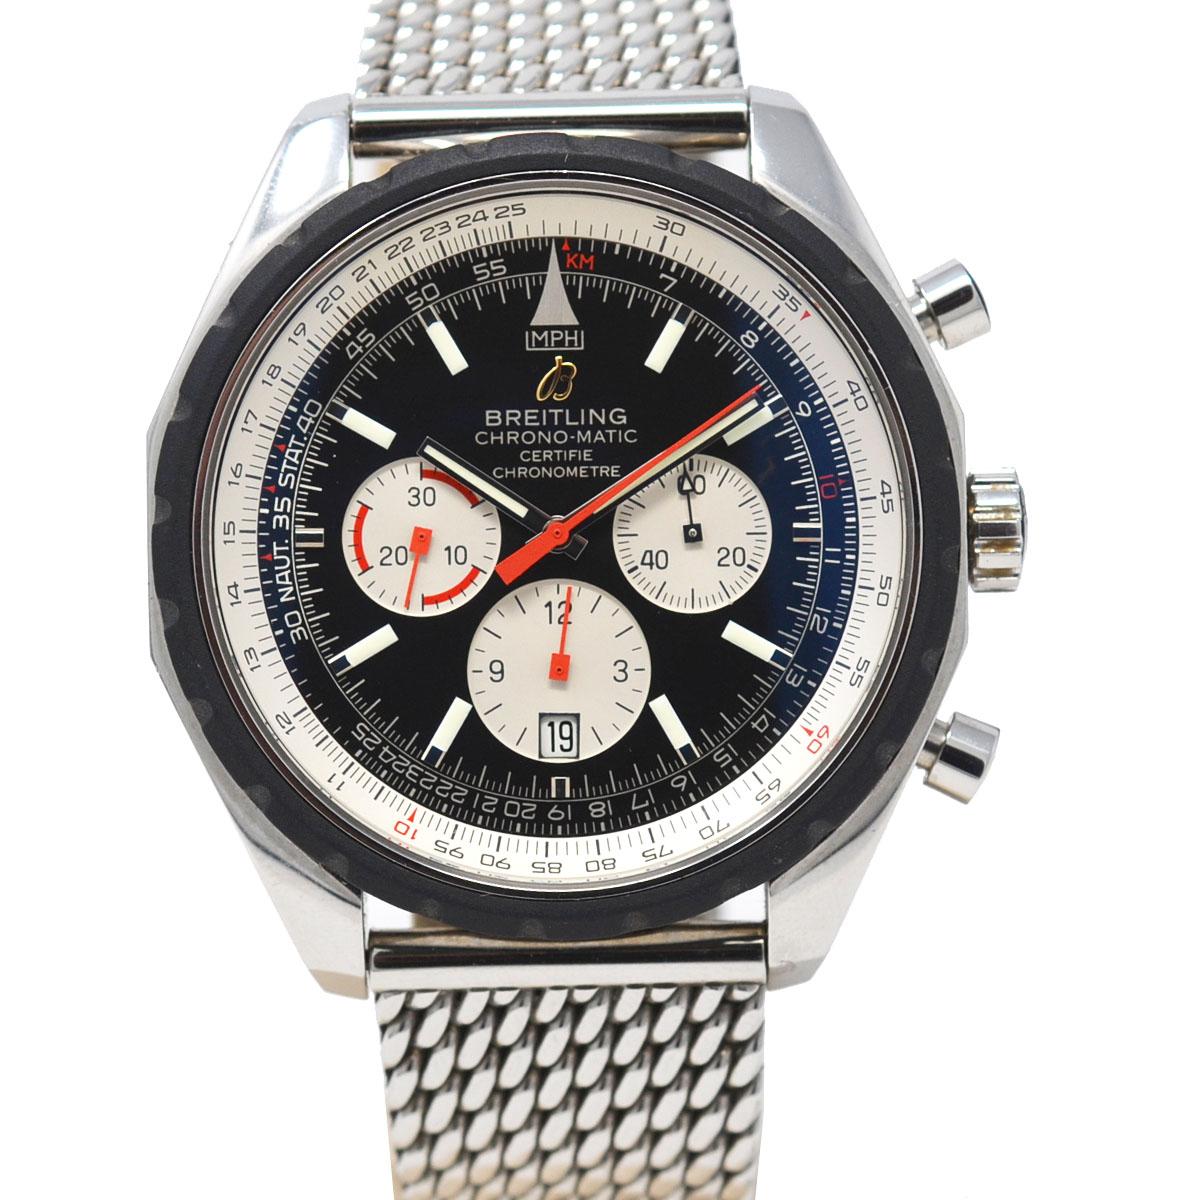 Company-Breitling
Style-Luxury Sport Watch
Model-Chronomatic 49
Reference Number-A14360
Case Metal-Stainless Steel
Case Measurement-49 mm
Bracelet-Stainless Steel Mesh Bracelet
Dial-Black and White
Bezel-Stainless Steel
Crystal-Scratch Resistant